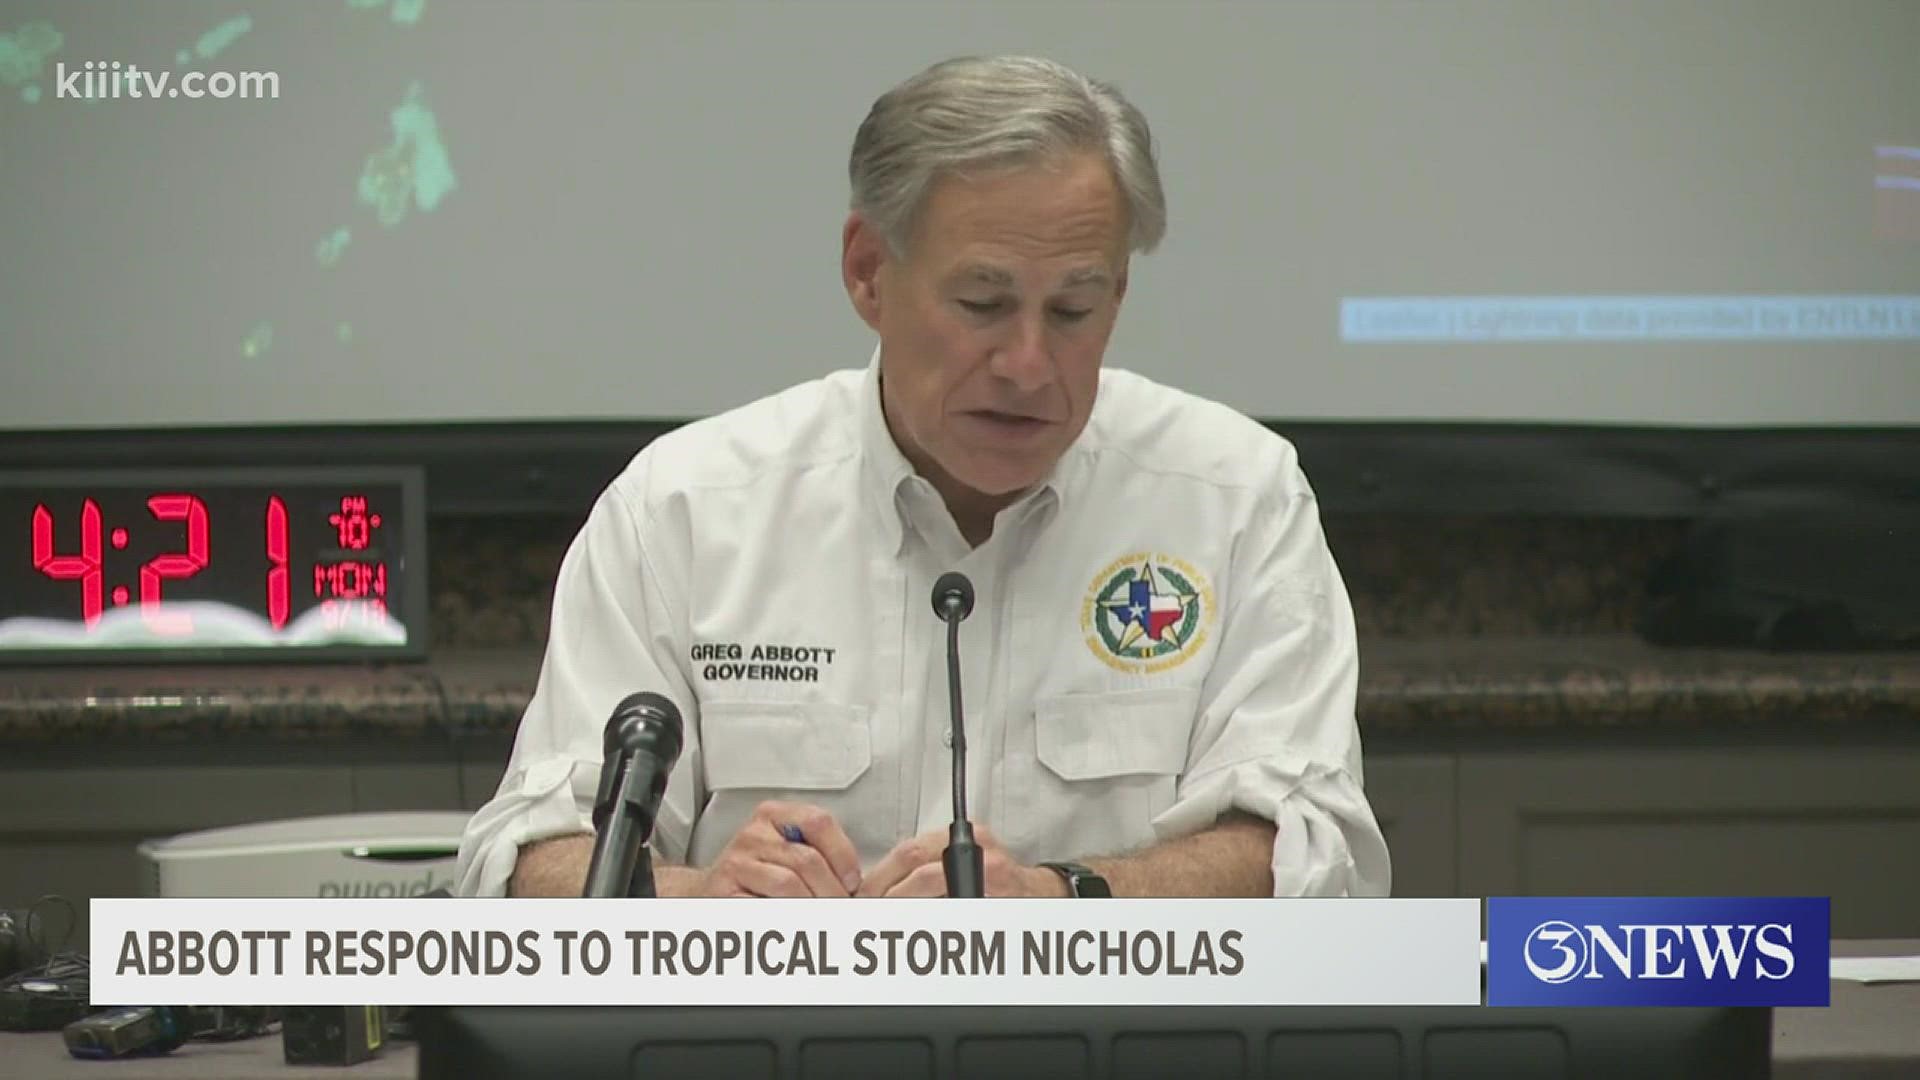 Gov. Abbott provides insight on how to respond to he Tropical Storm.